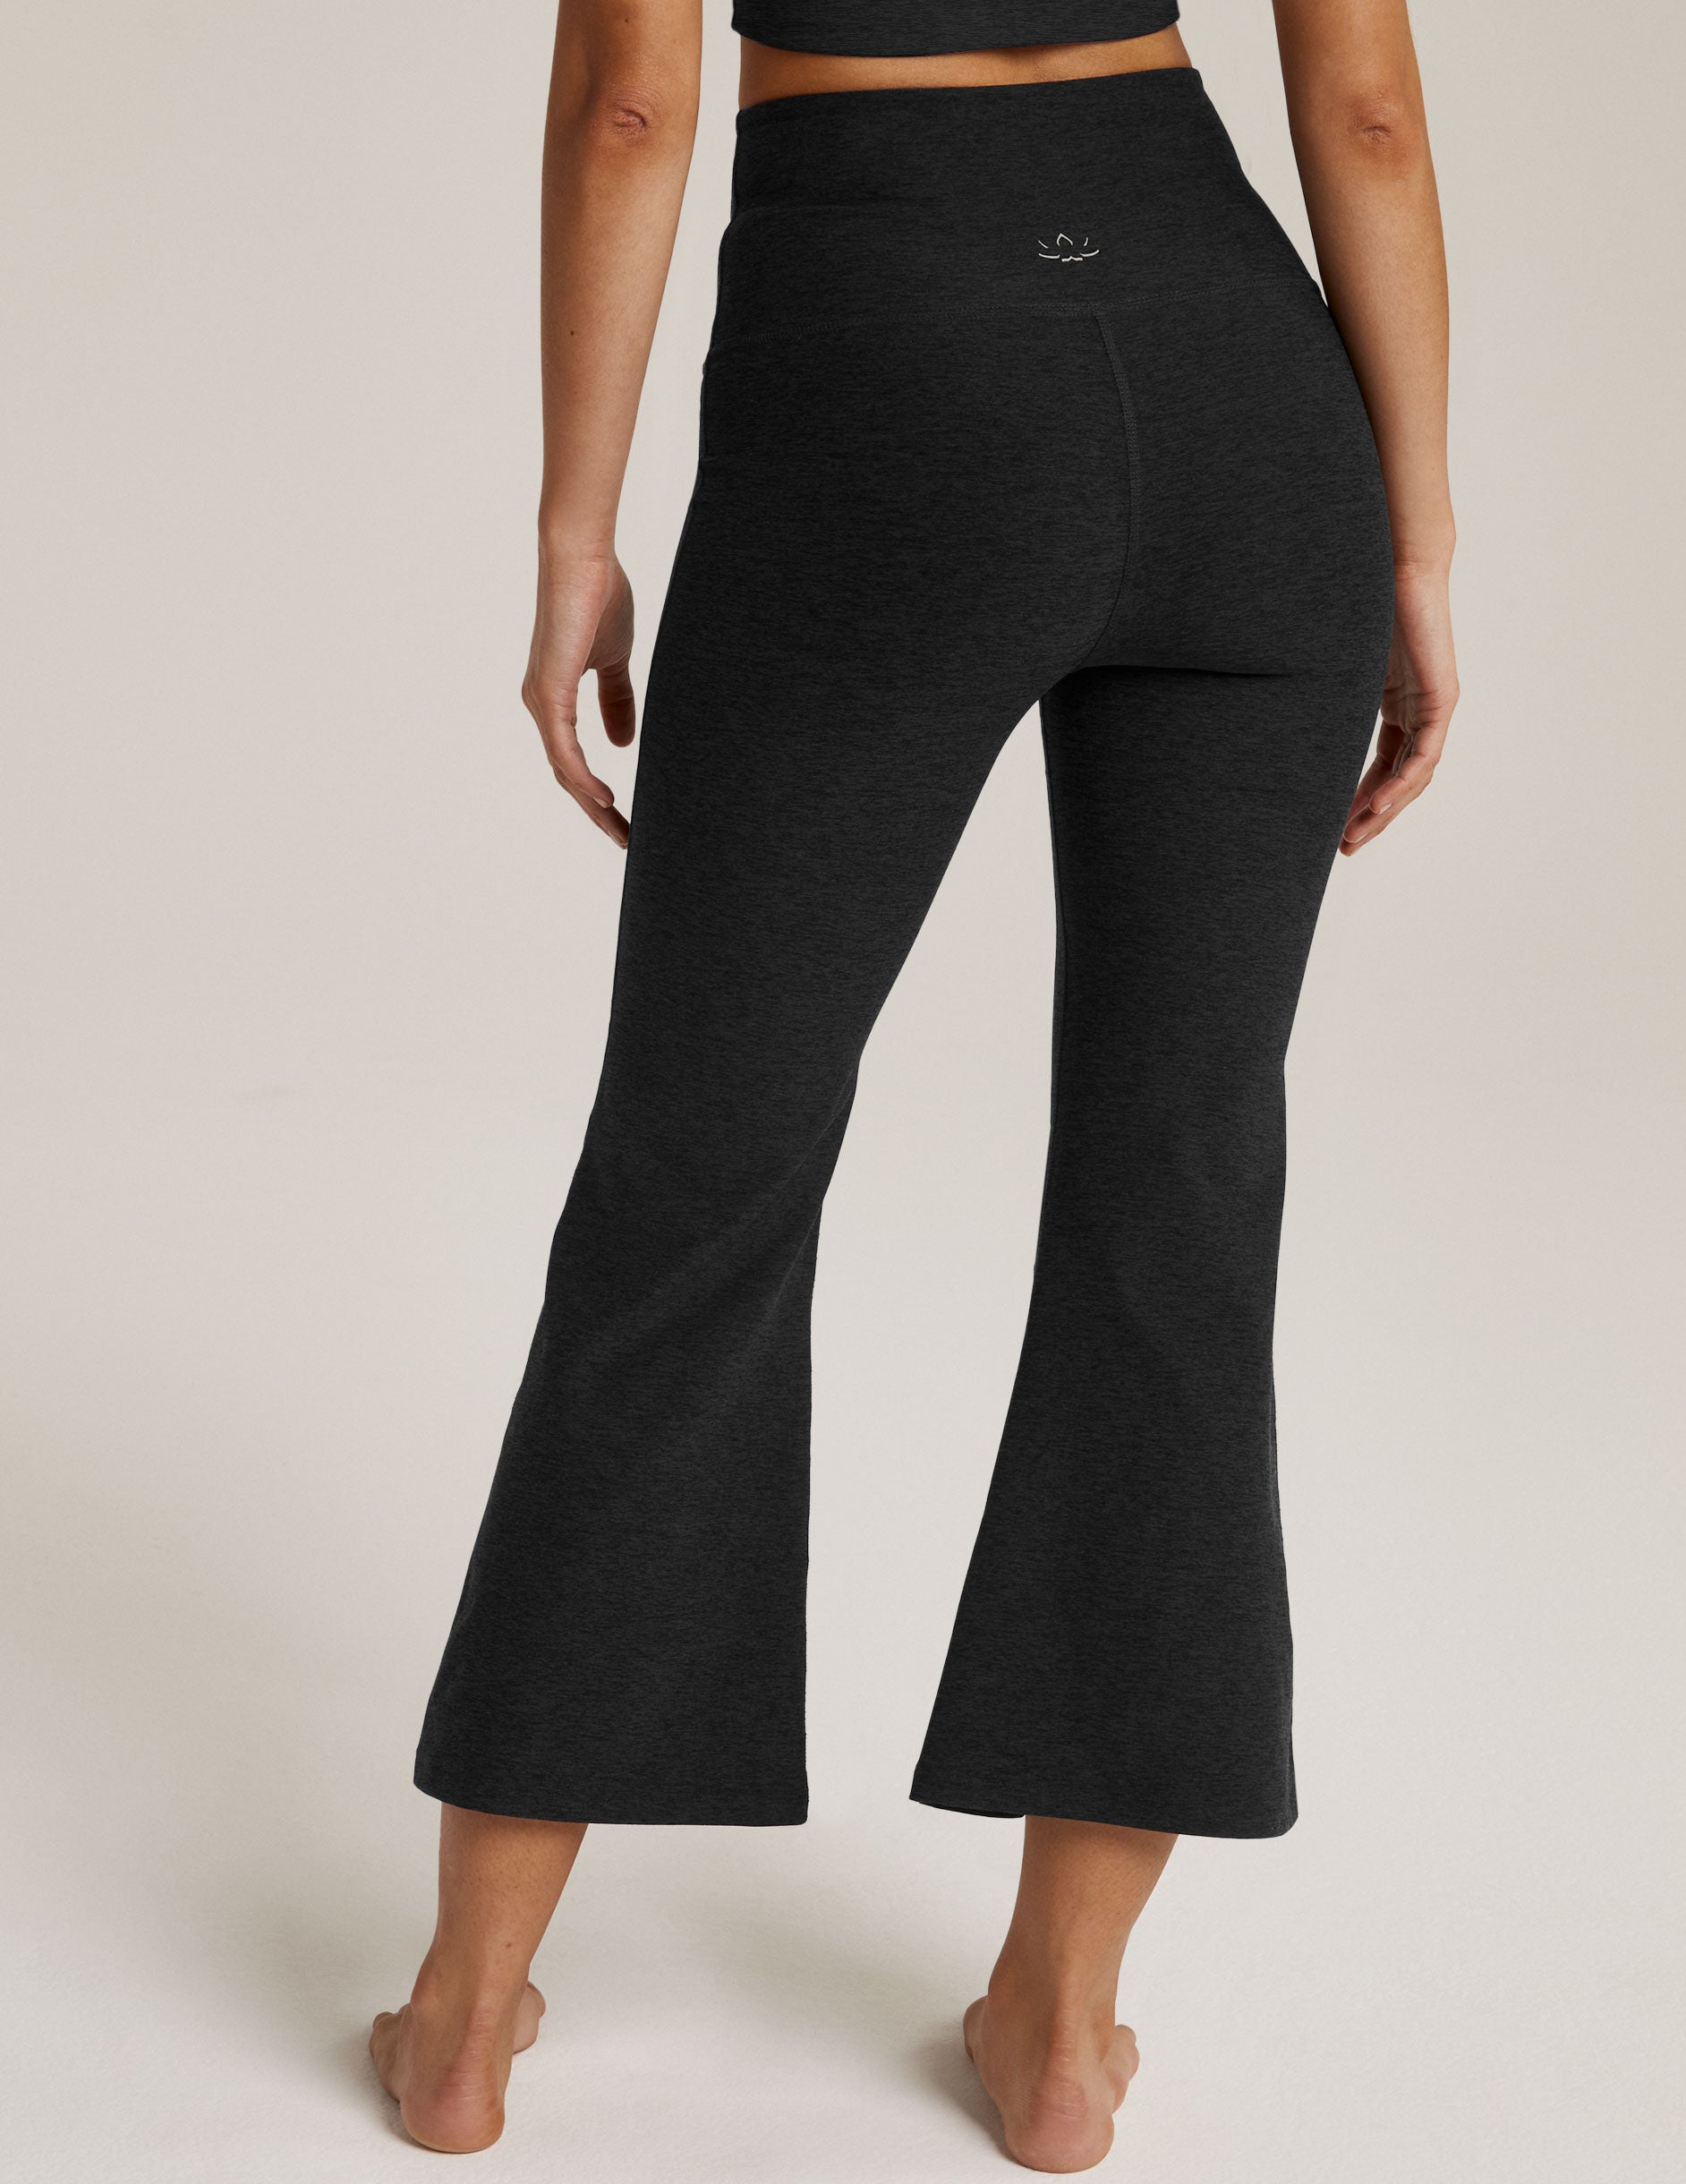 Black High Rise Classic Bell Bottom at Maria Vincent Boutique